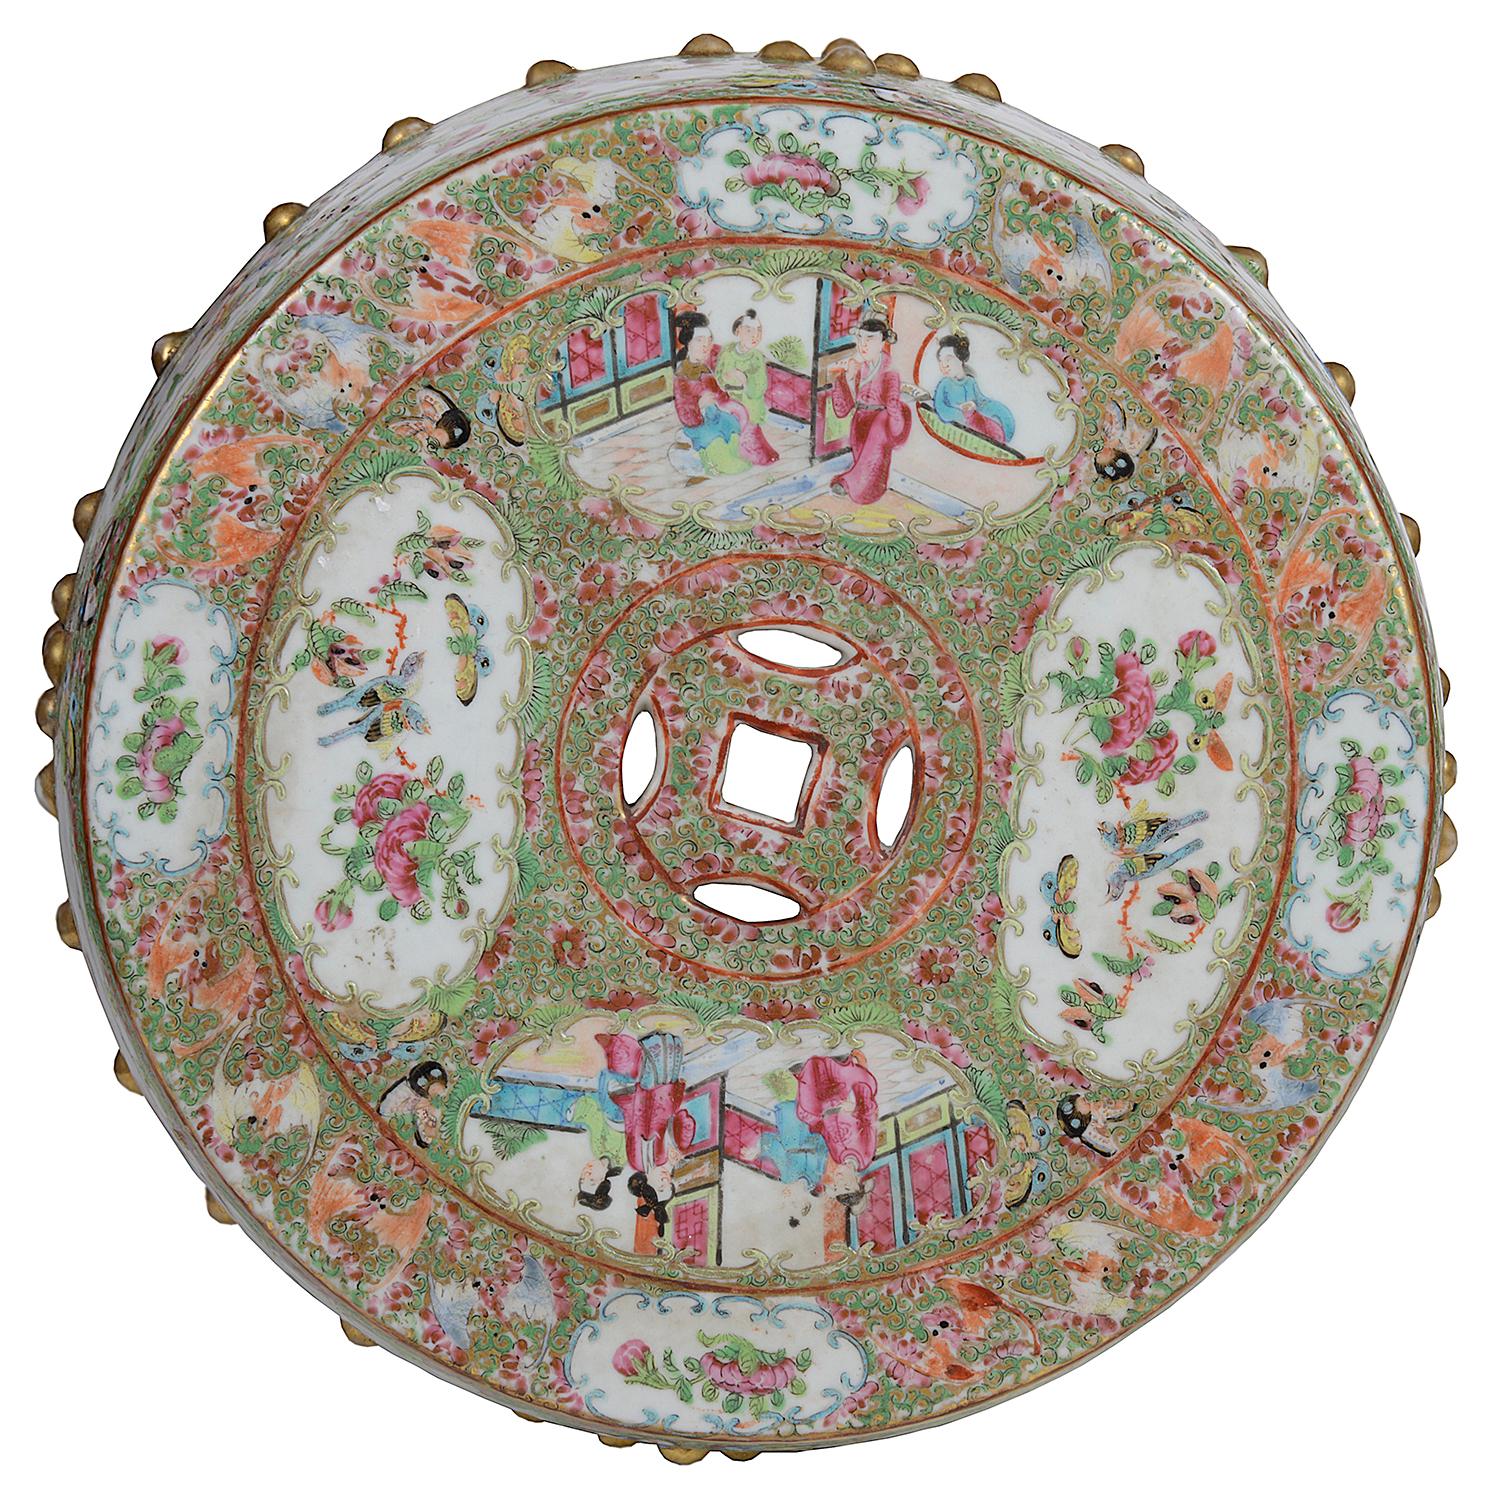 Hand-Painted 19th Century Chinese Cantonese / Rose Medallion Garden Seat